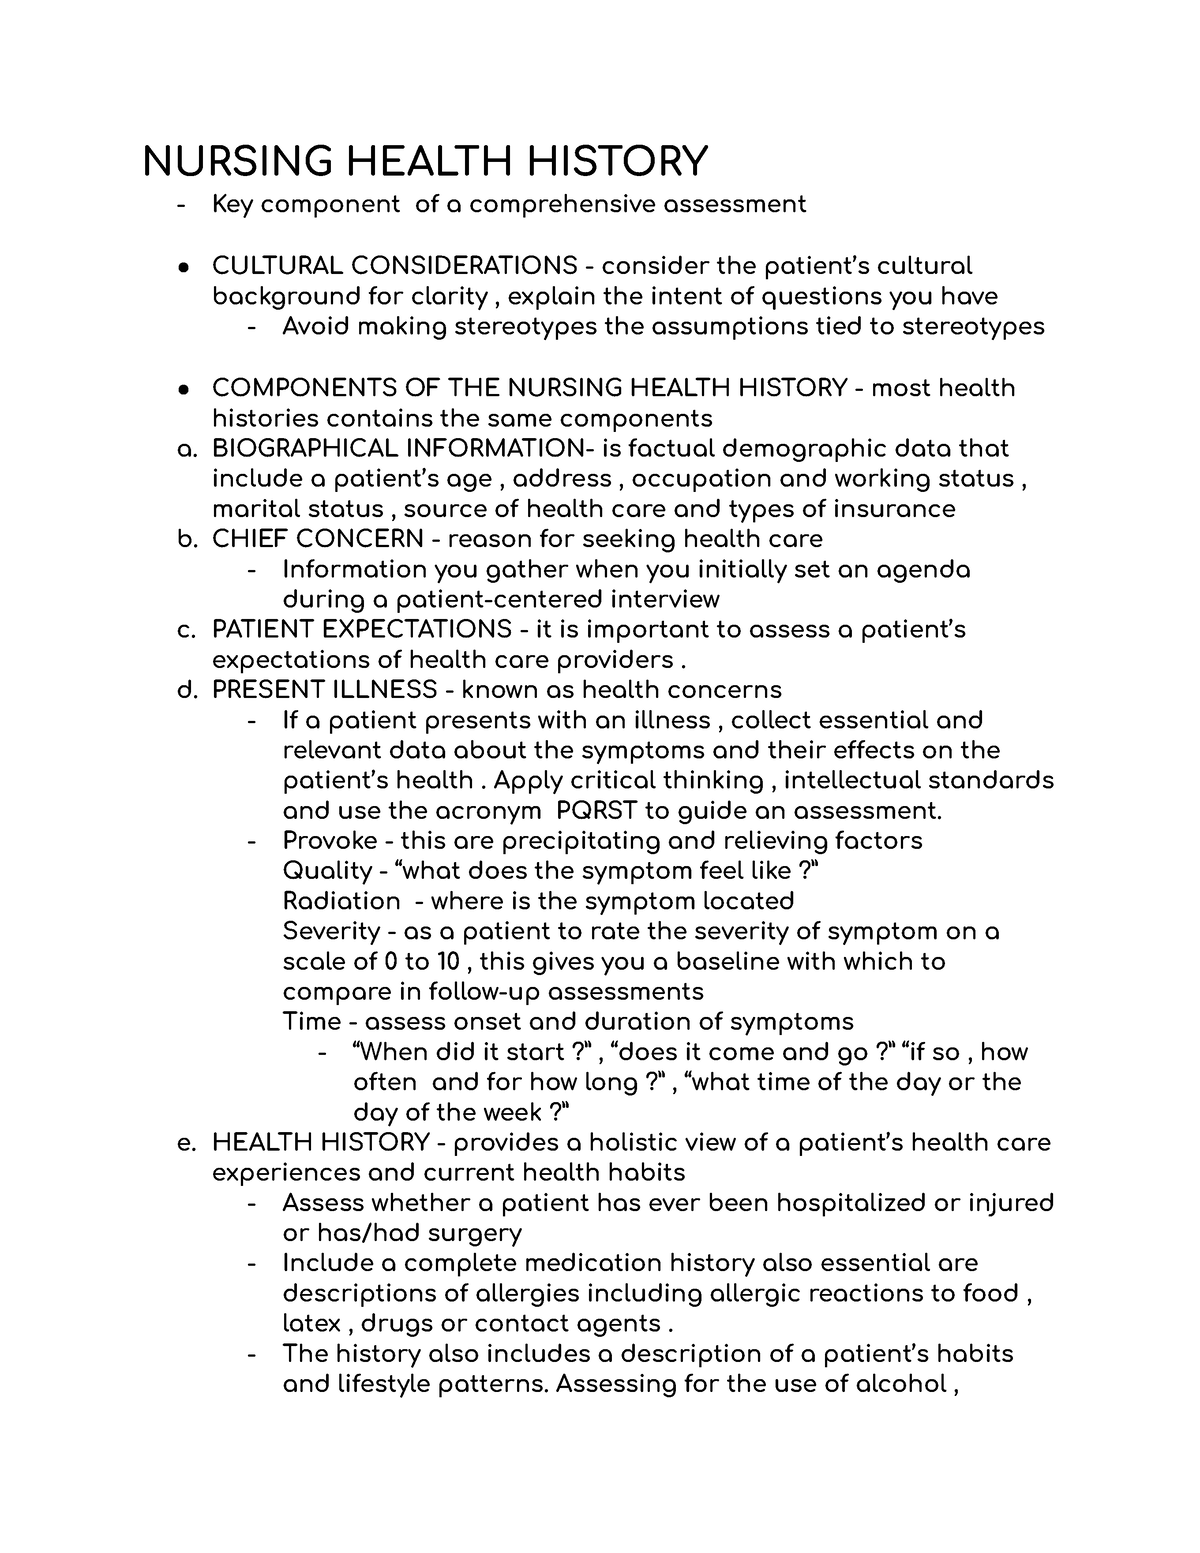 health history interview assignment